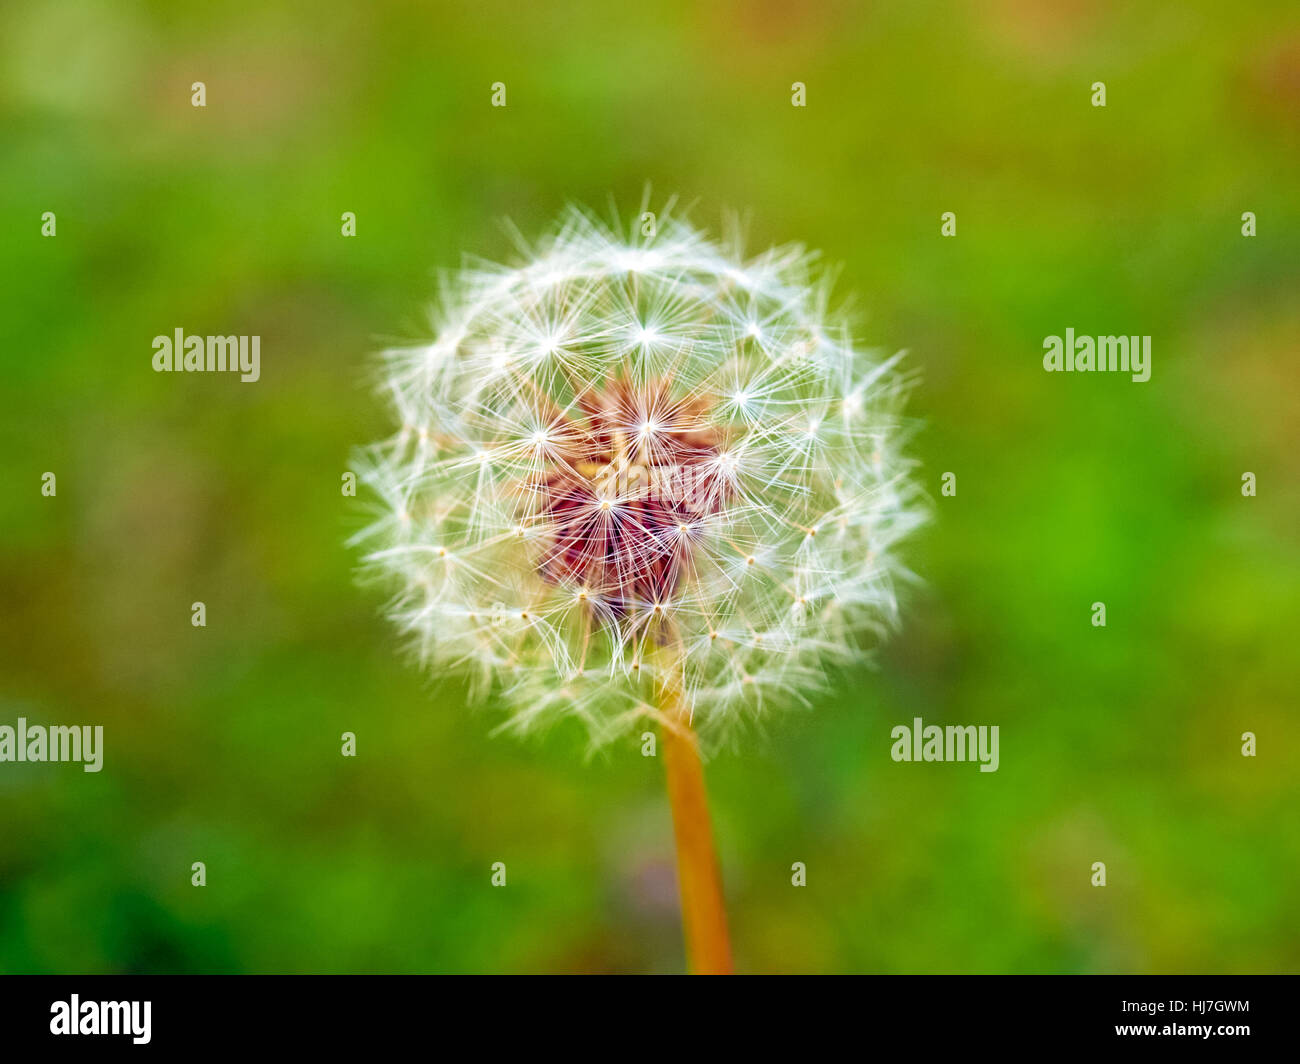 flower, plant, blurred, focus, selective, meadow, grass, lawn, green, backdrop, Stock Photo